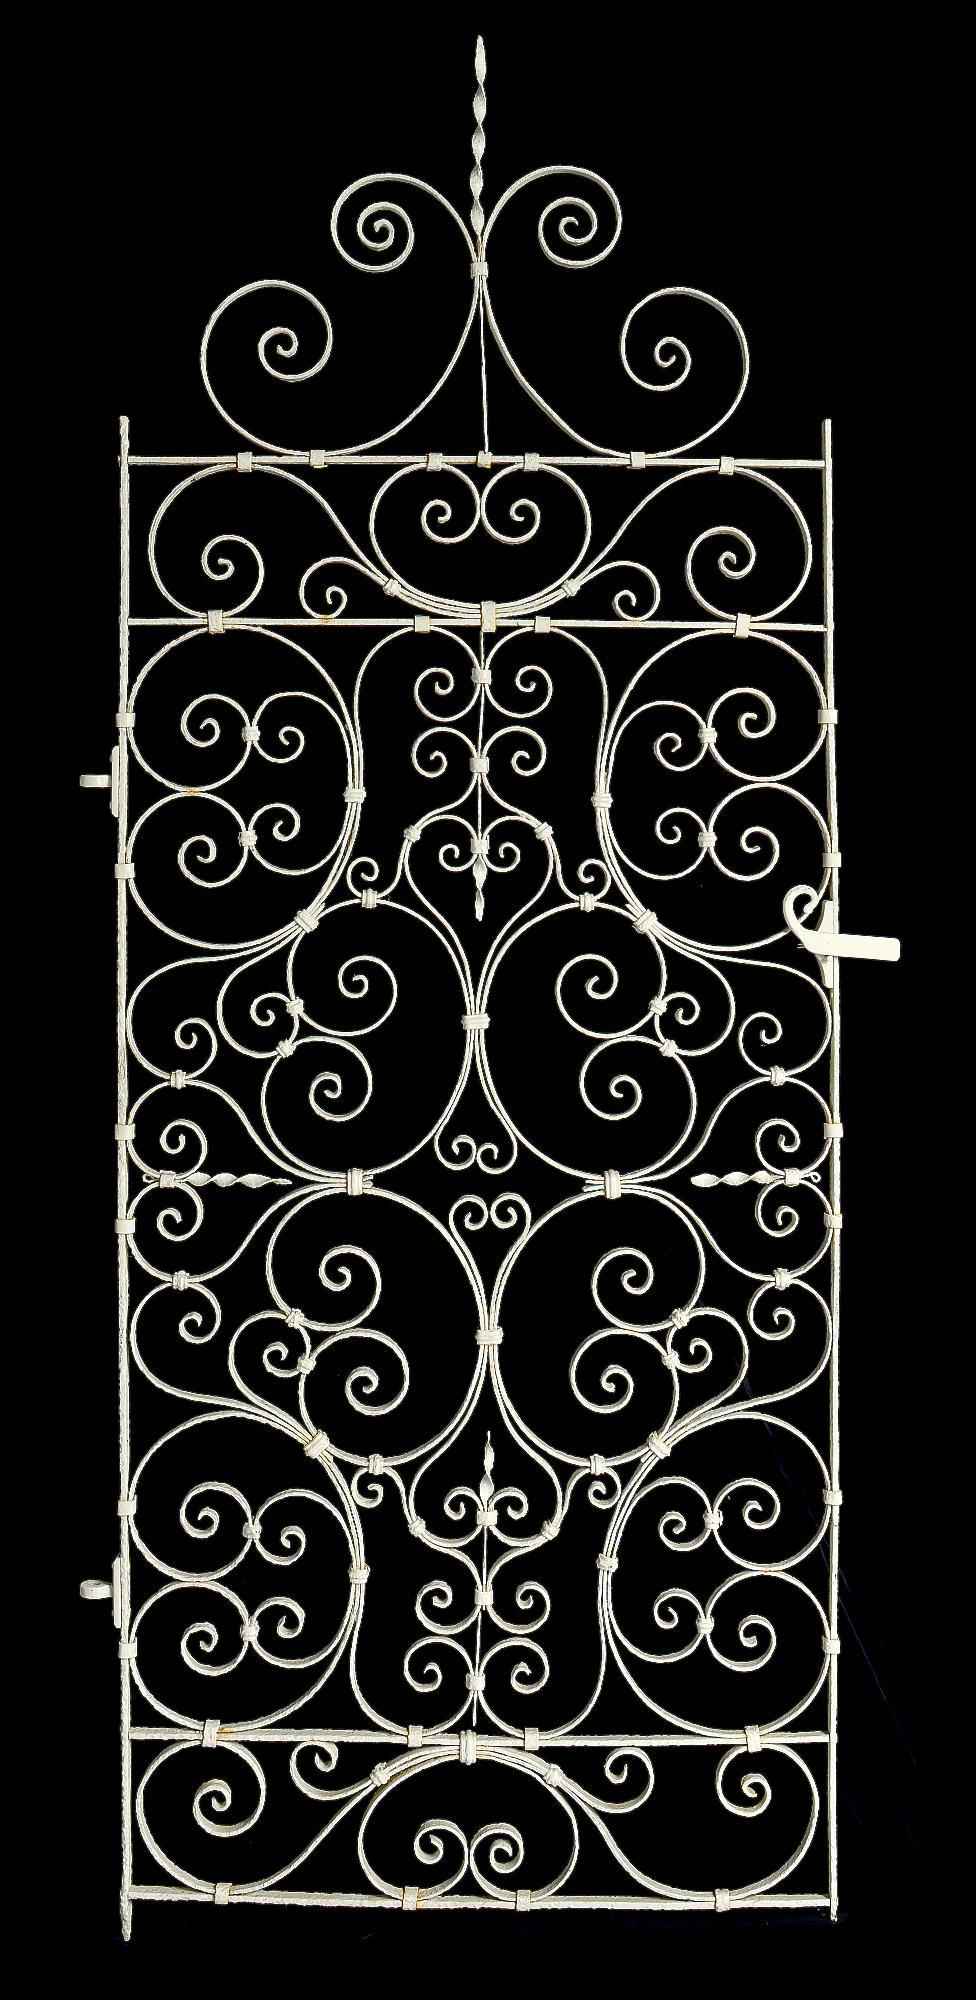 Architectural: A wrought iron gatelate 19th century163cm high by 63cm wide